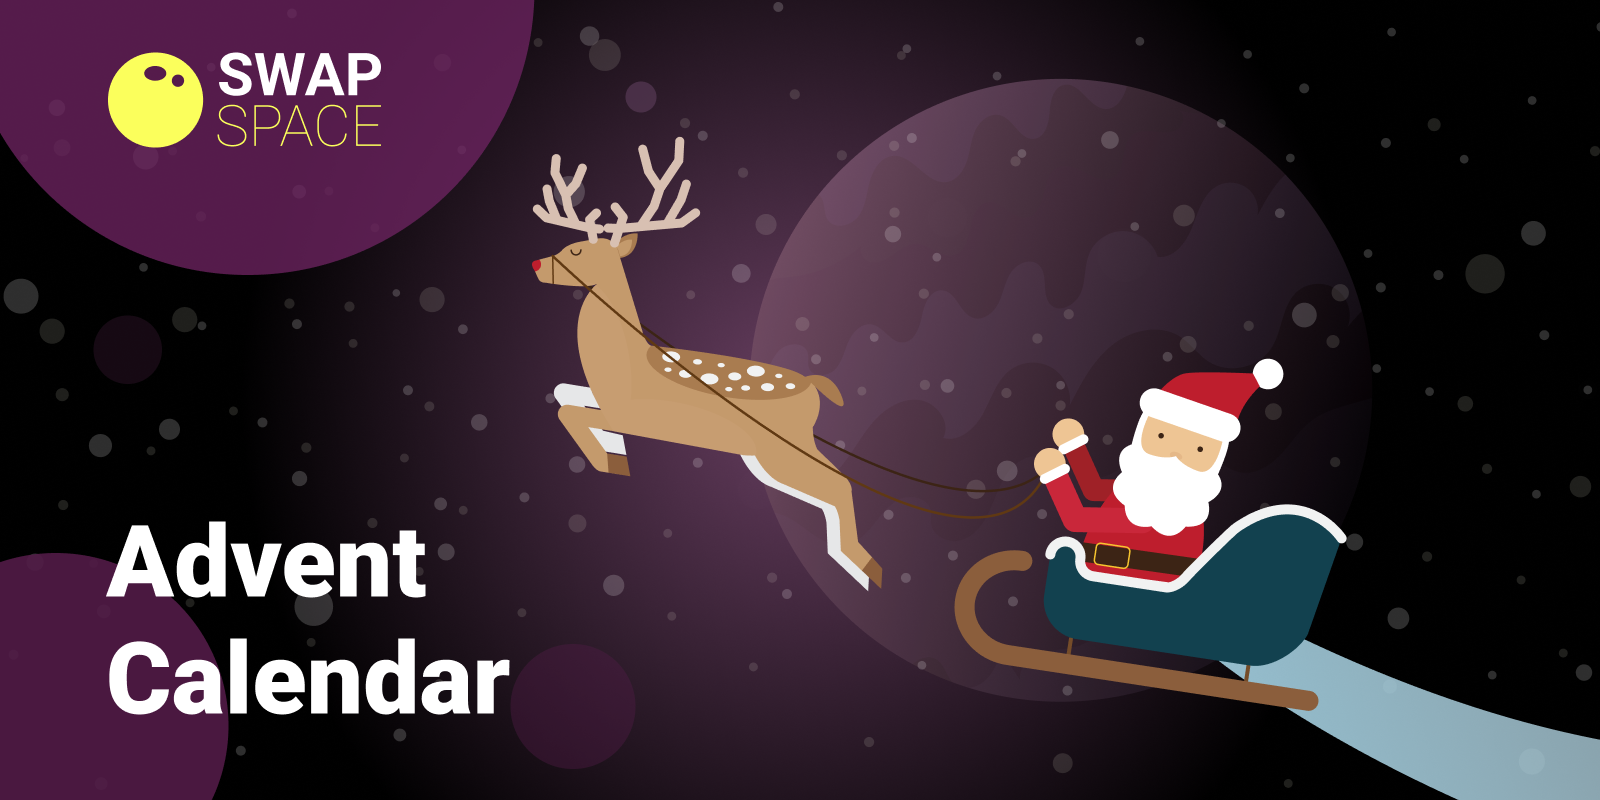 Holidays are coming: feel the spirit with the crypto advent calendar by SwapSpace